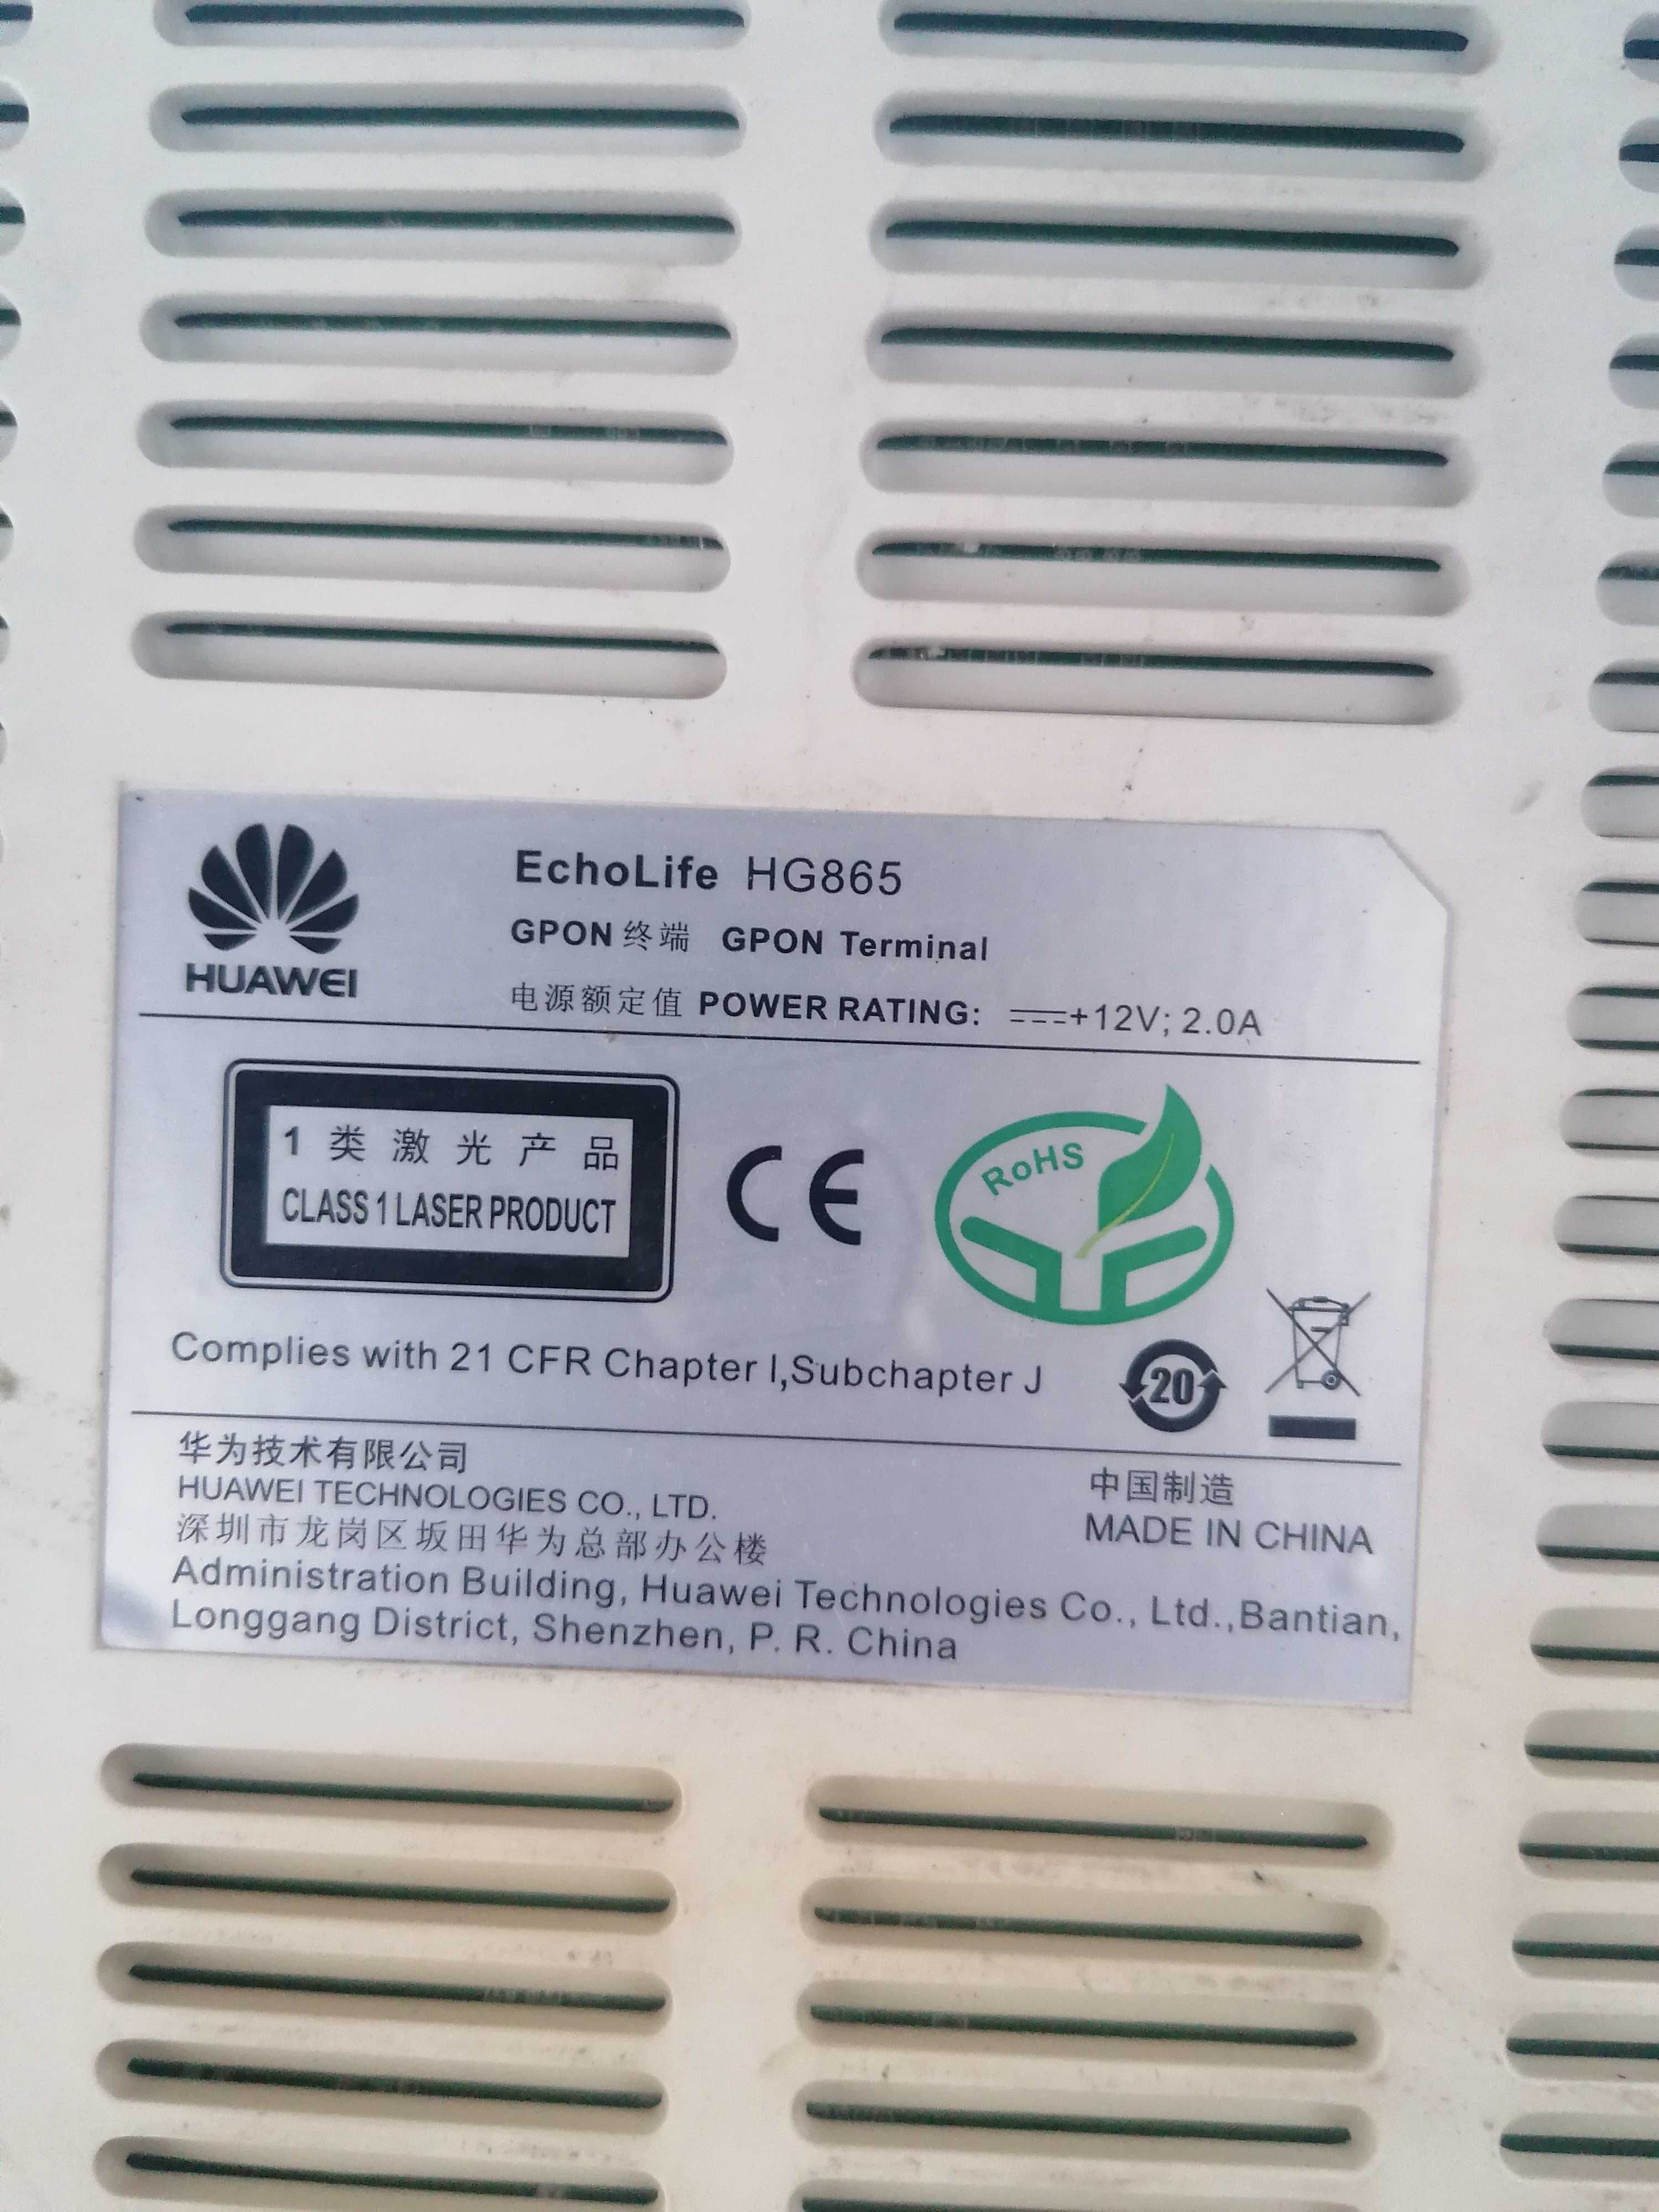 Vând 2 routere huawey functionale